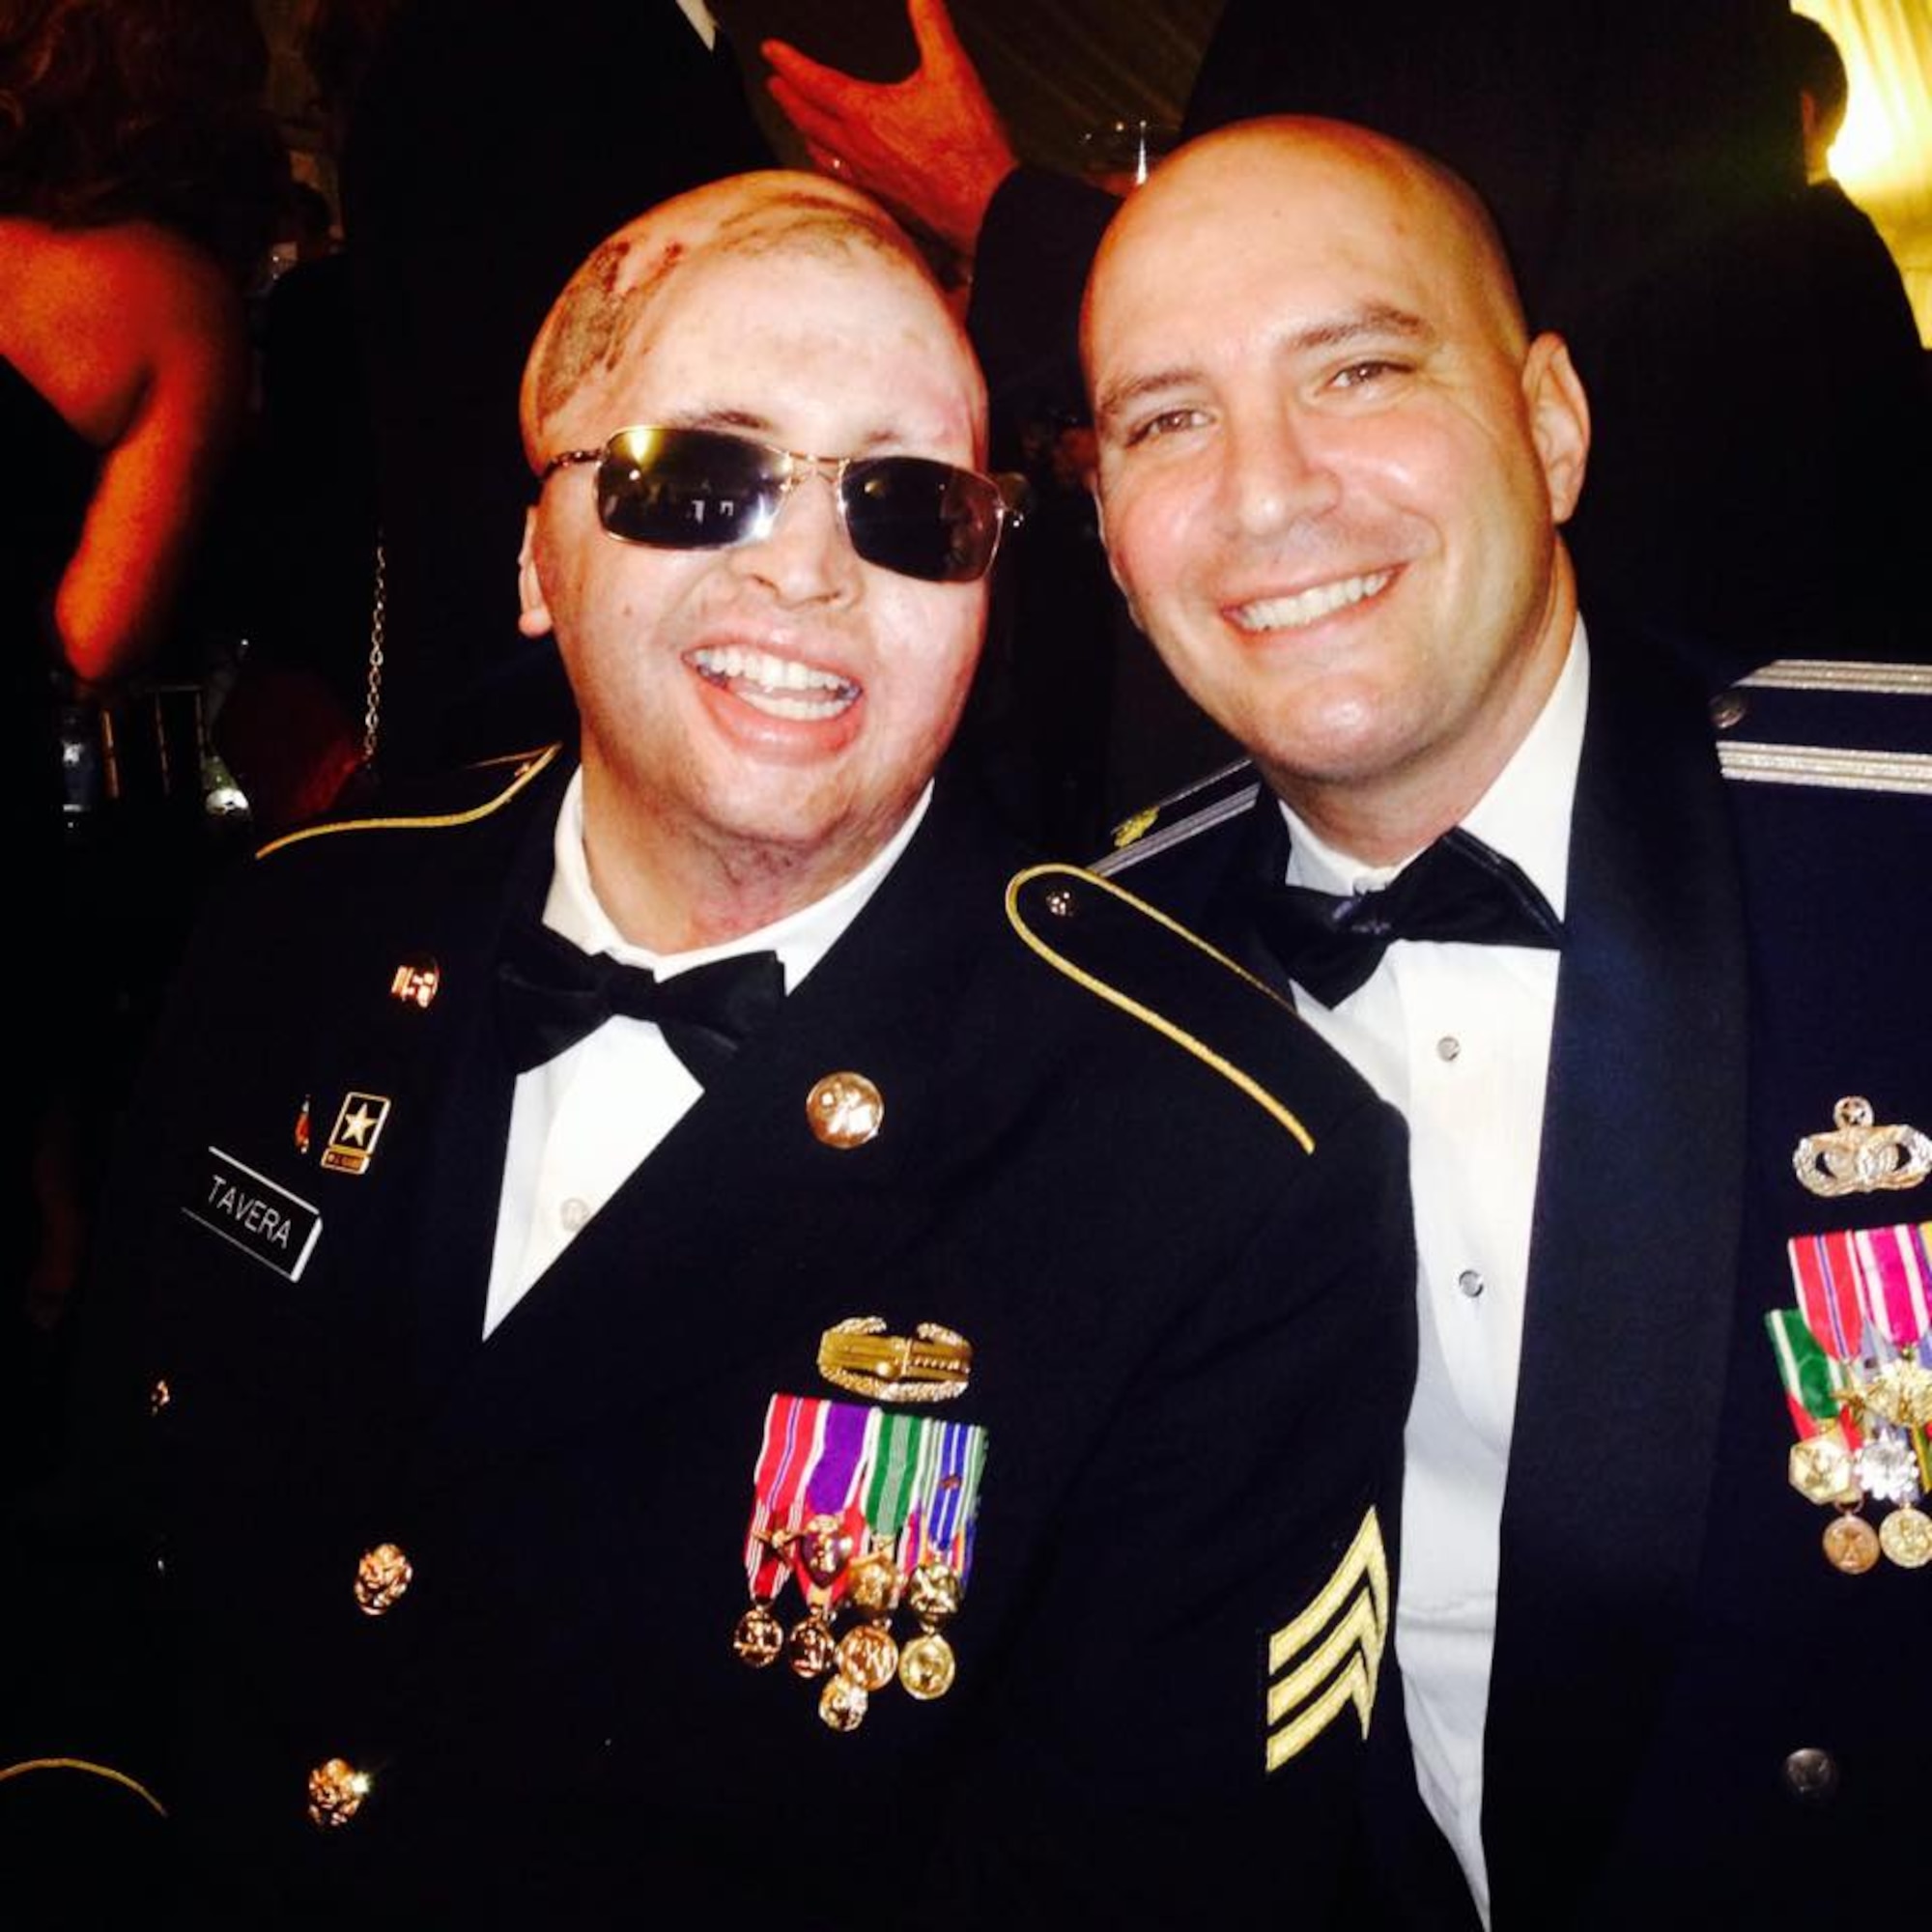 Air Force Lt. Col. Kevin Lombardo, 341st Missile Security Forces Squadron commander, then Maj. Lombardo, right, poses for a photo with Army Sgt. Joel Tavera at a military ball.